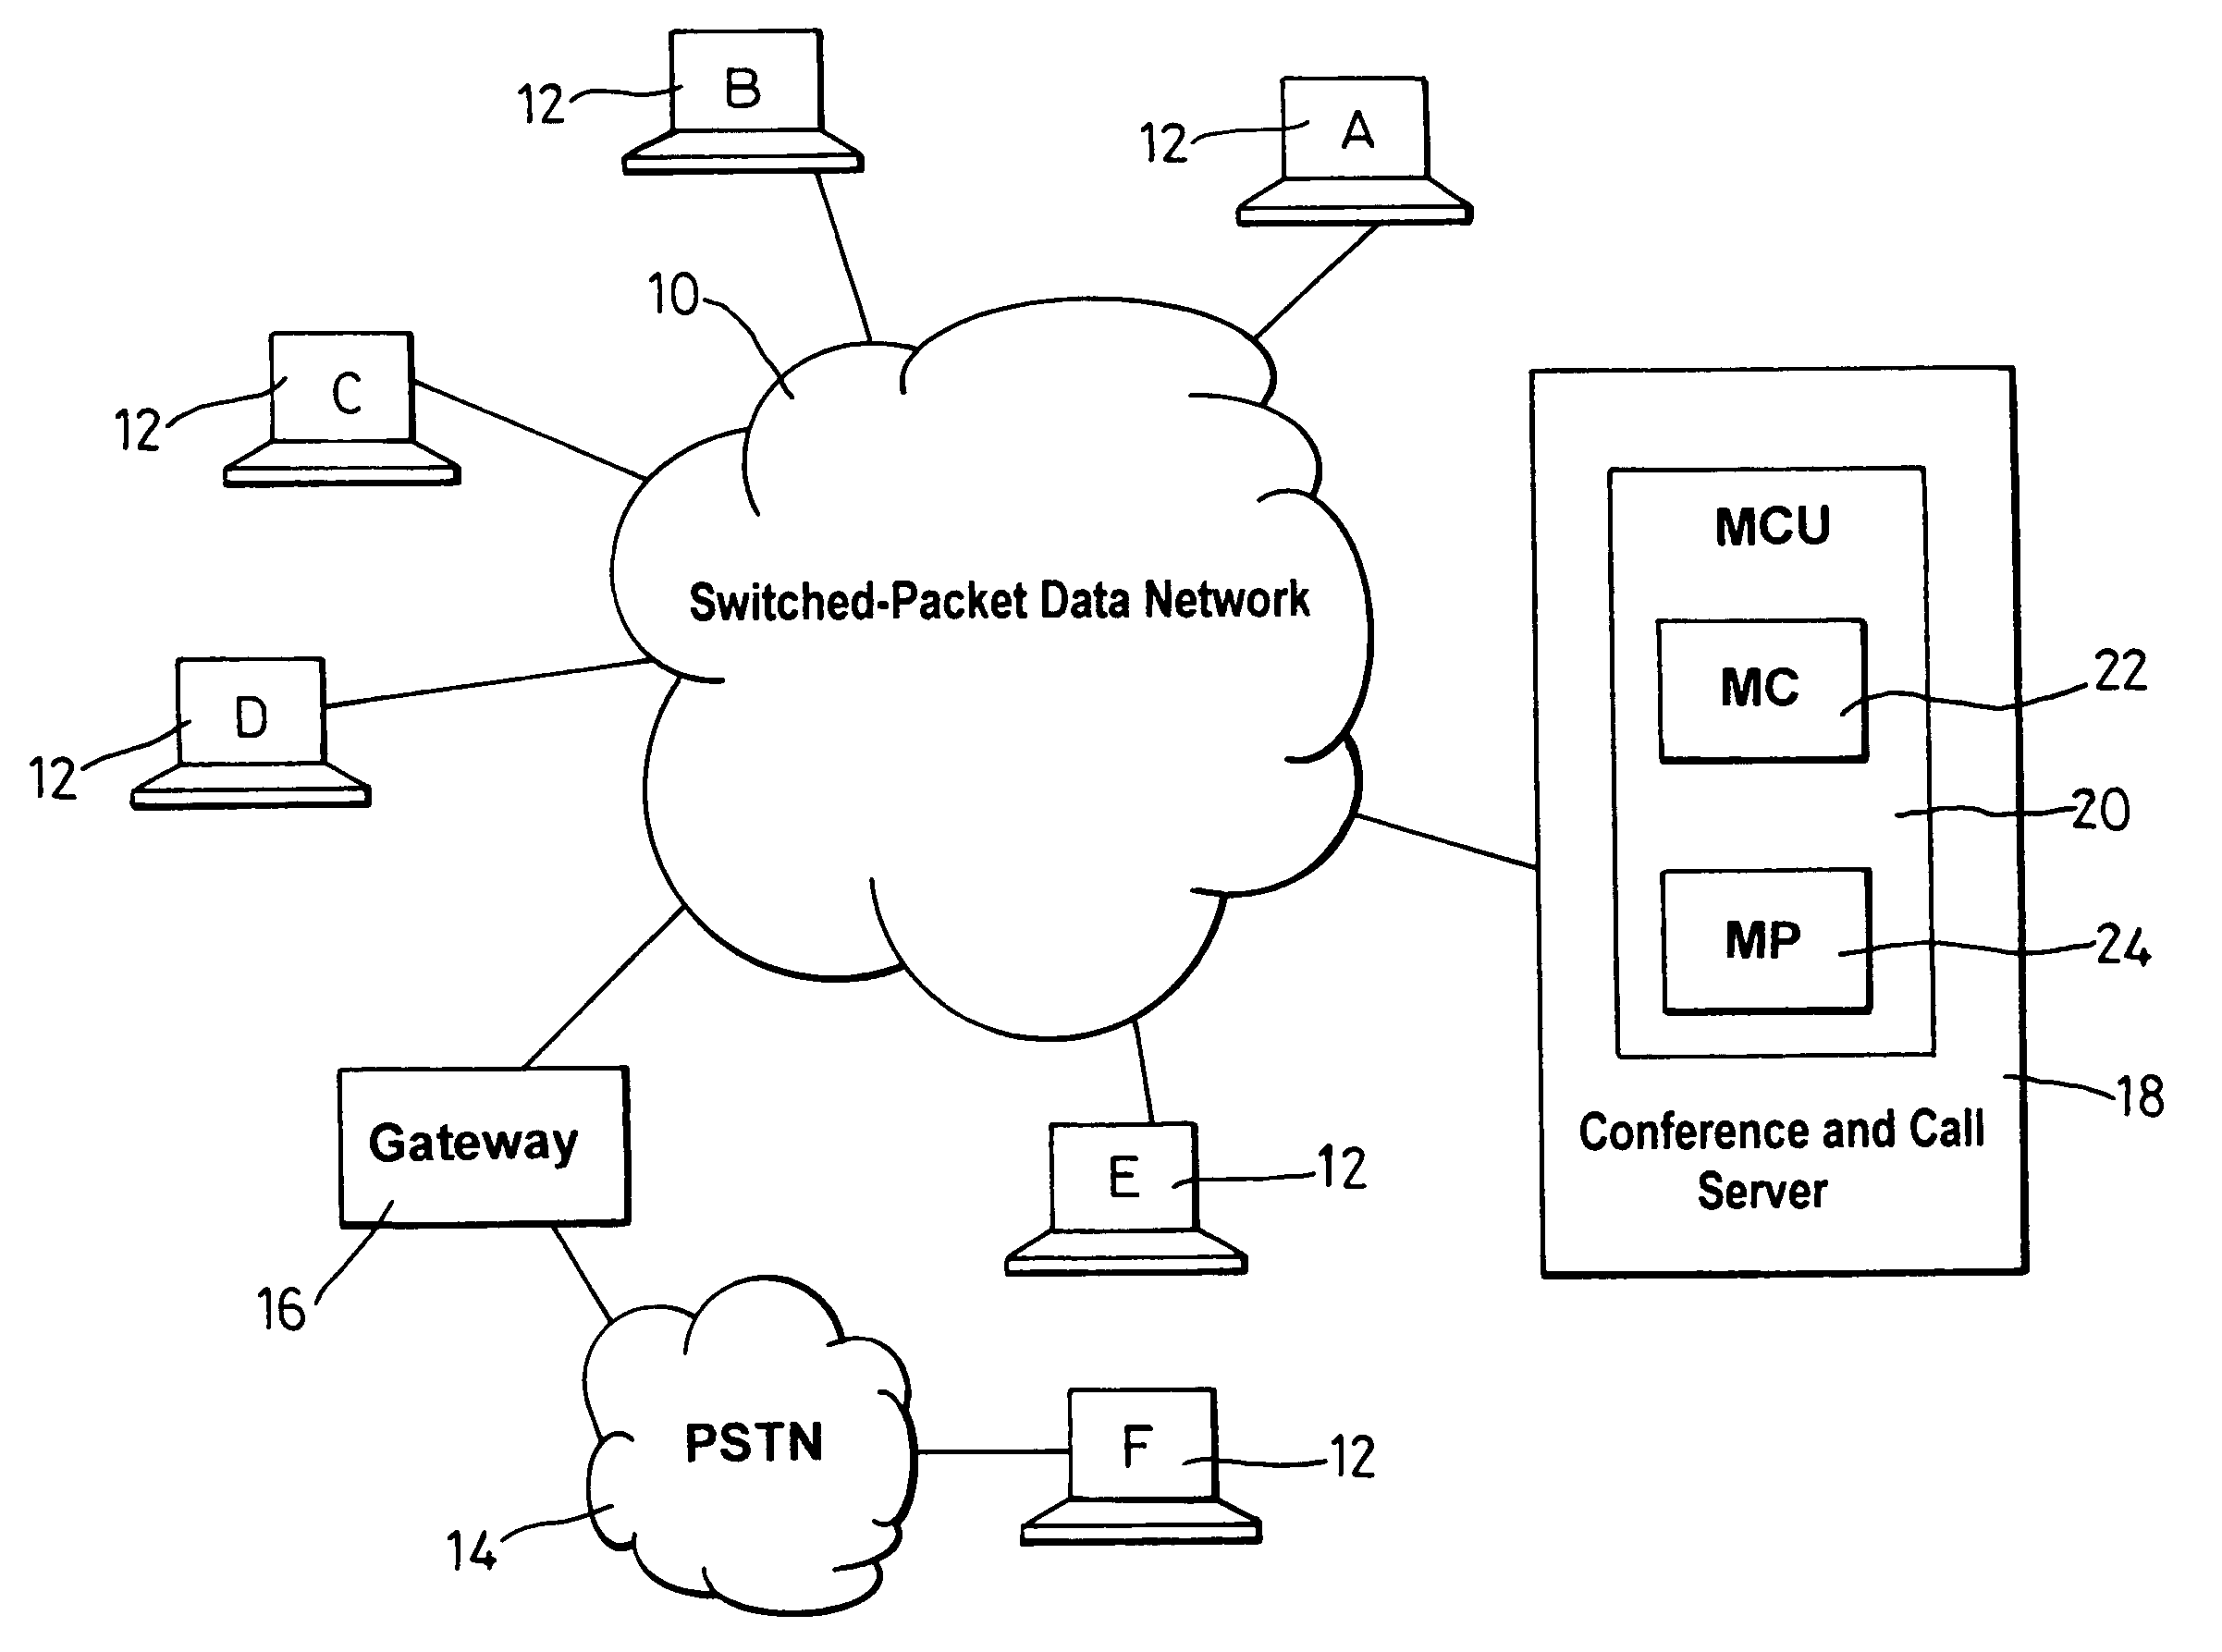 Methods of controlling video signals in a video conference